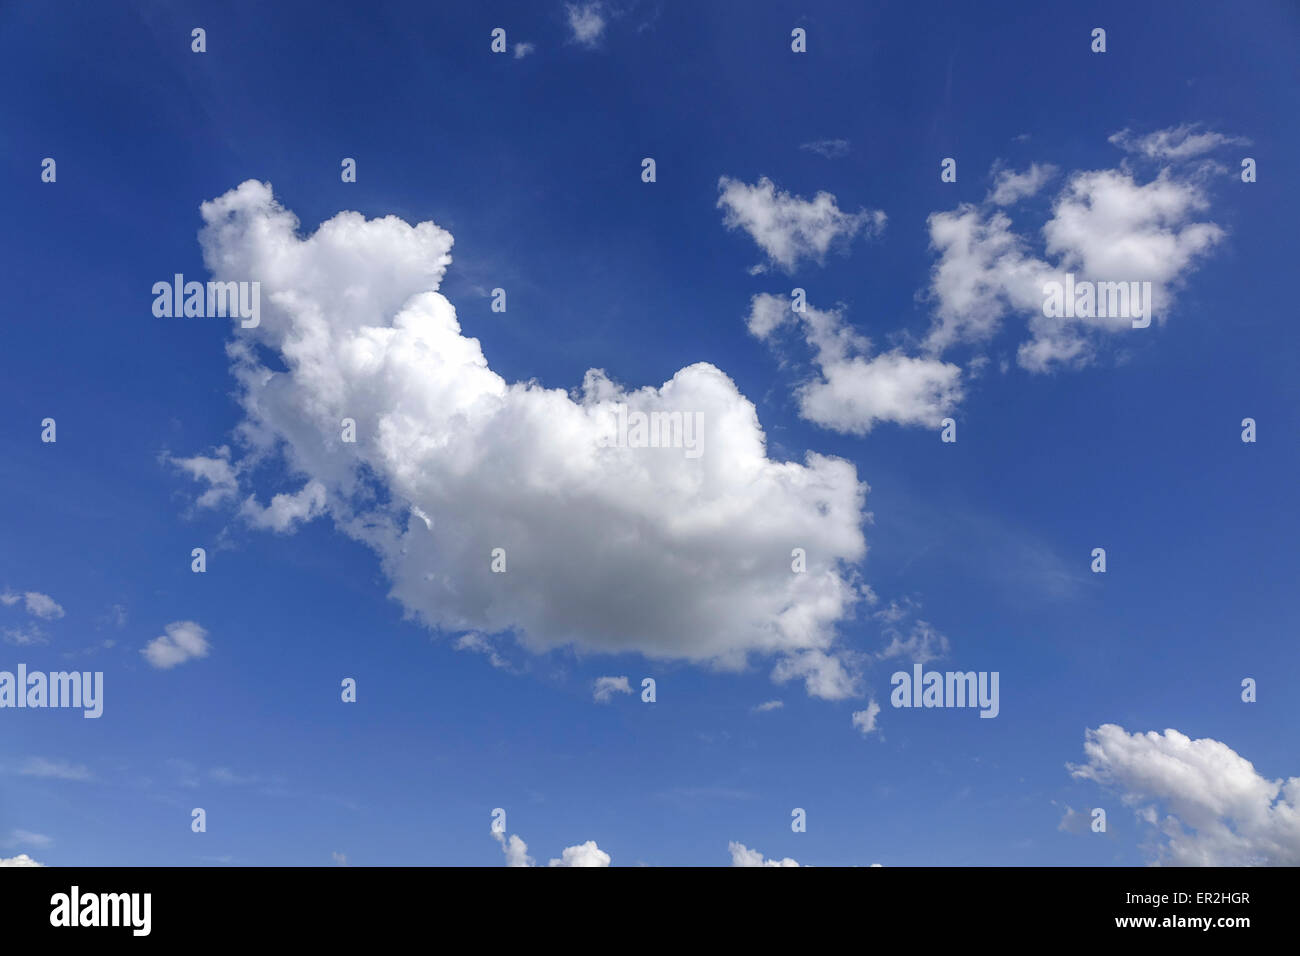 Cumuluswolken am blauen Himmel, Cumulus clouds against a blue sky, .blue and white, Cirrocumulus, cloud, formations, formation,  Stock Photo